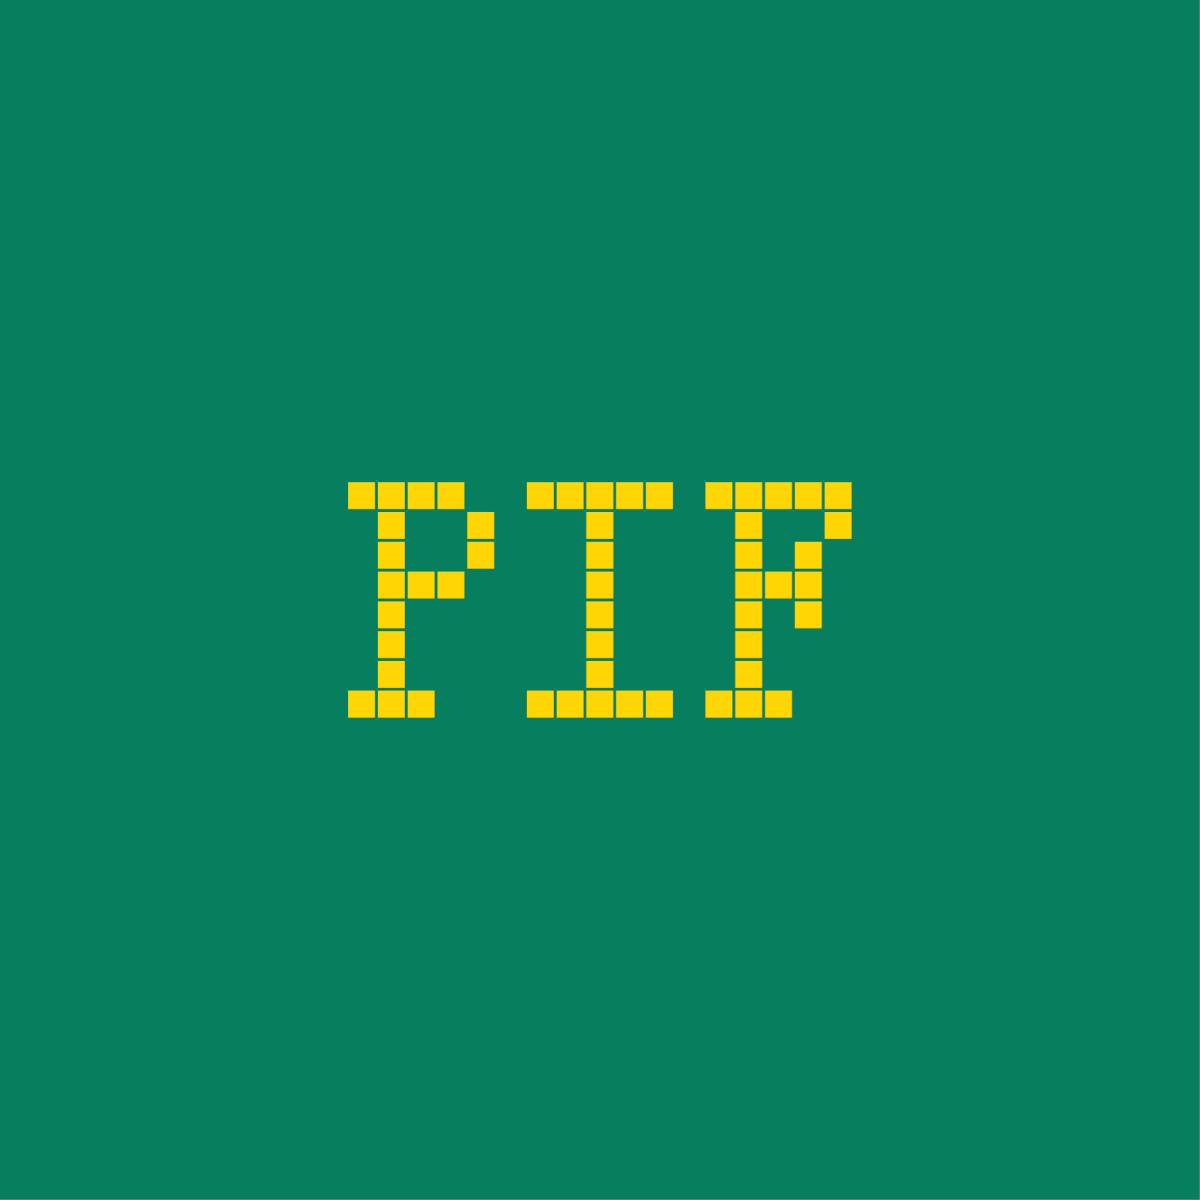 group PIF Financial play with coins NFT icon on brand colour green